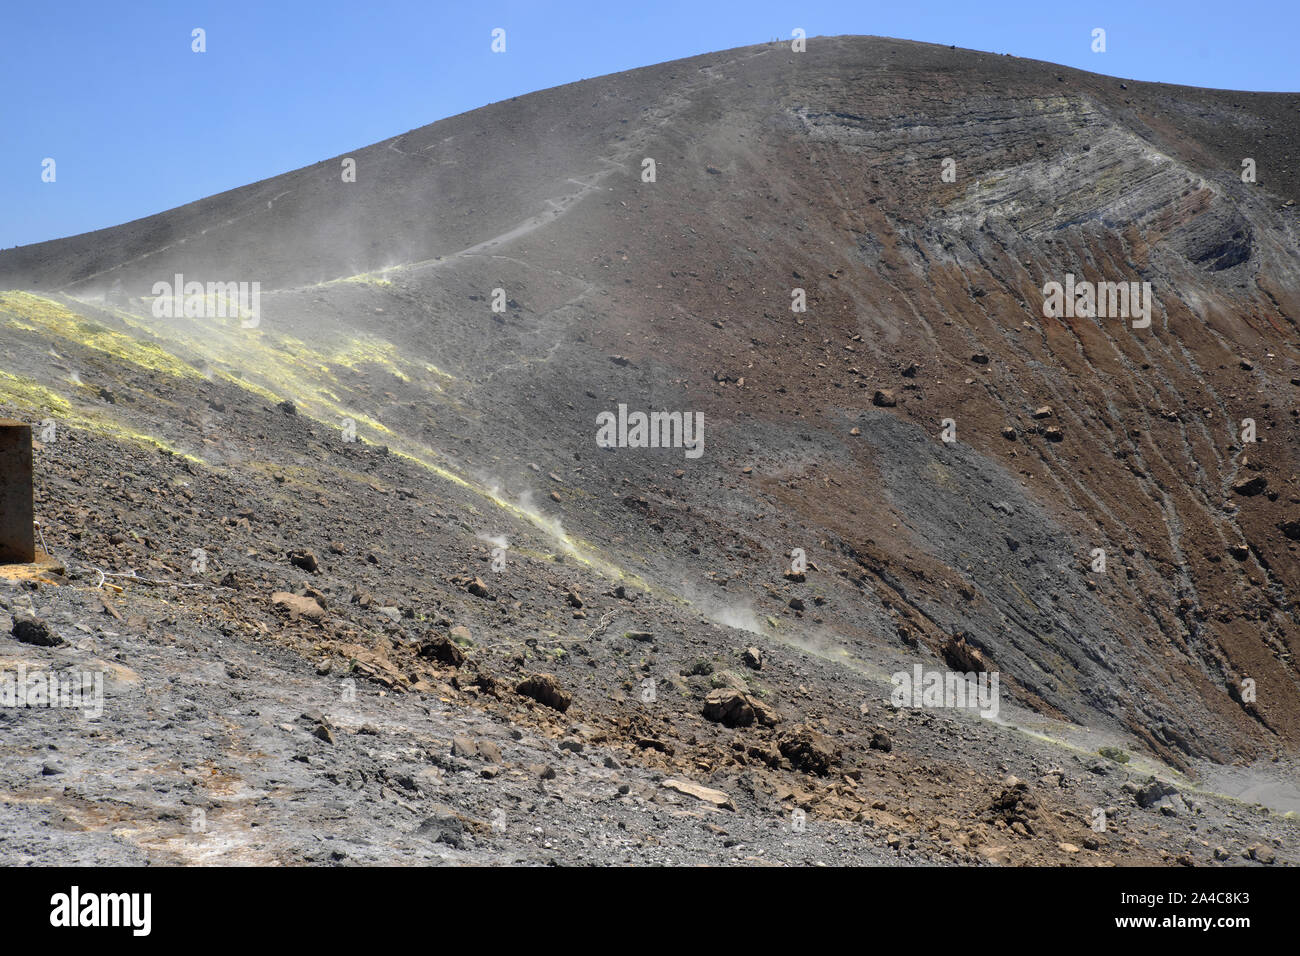 Sulfur fumaroles and chloride crusts on the crater rim of Gran Cratere on Vulcano Island, Aeolian Islands, Sicily, Italy. Stock Photo